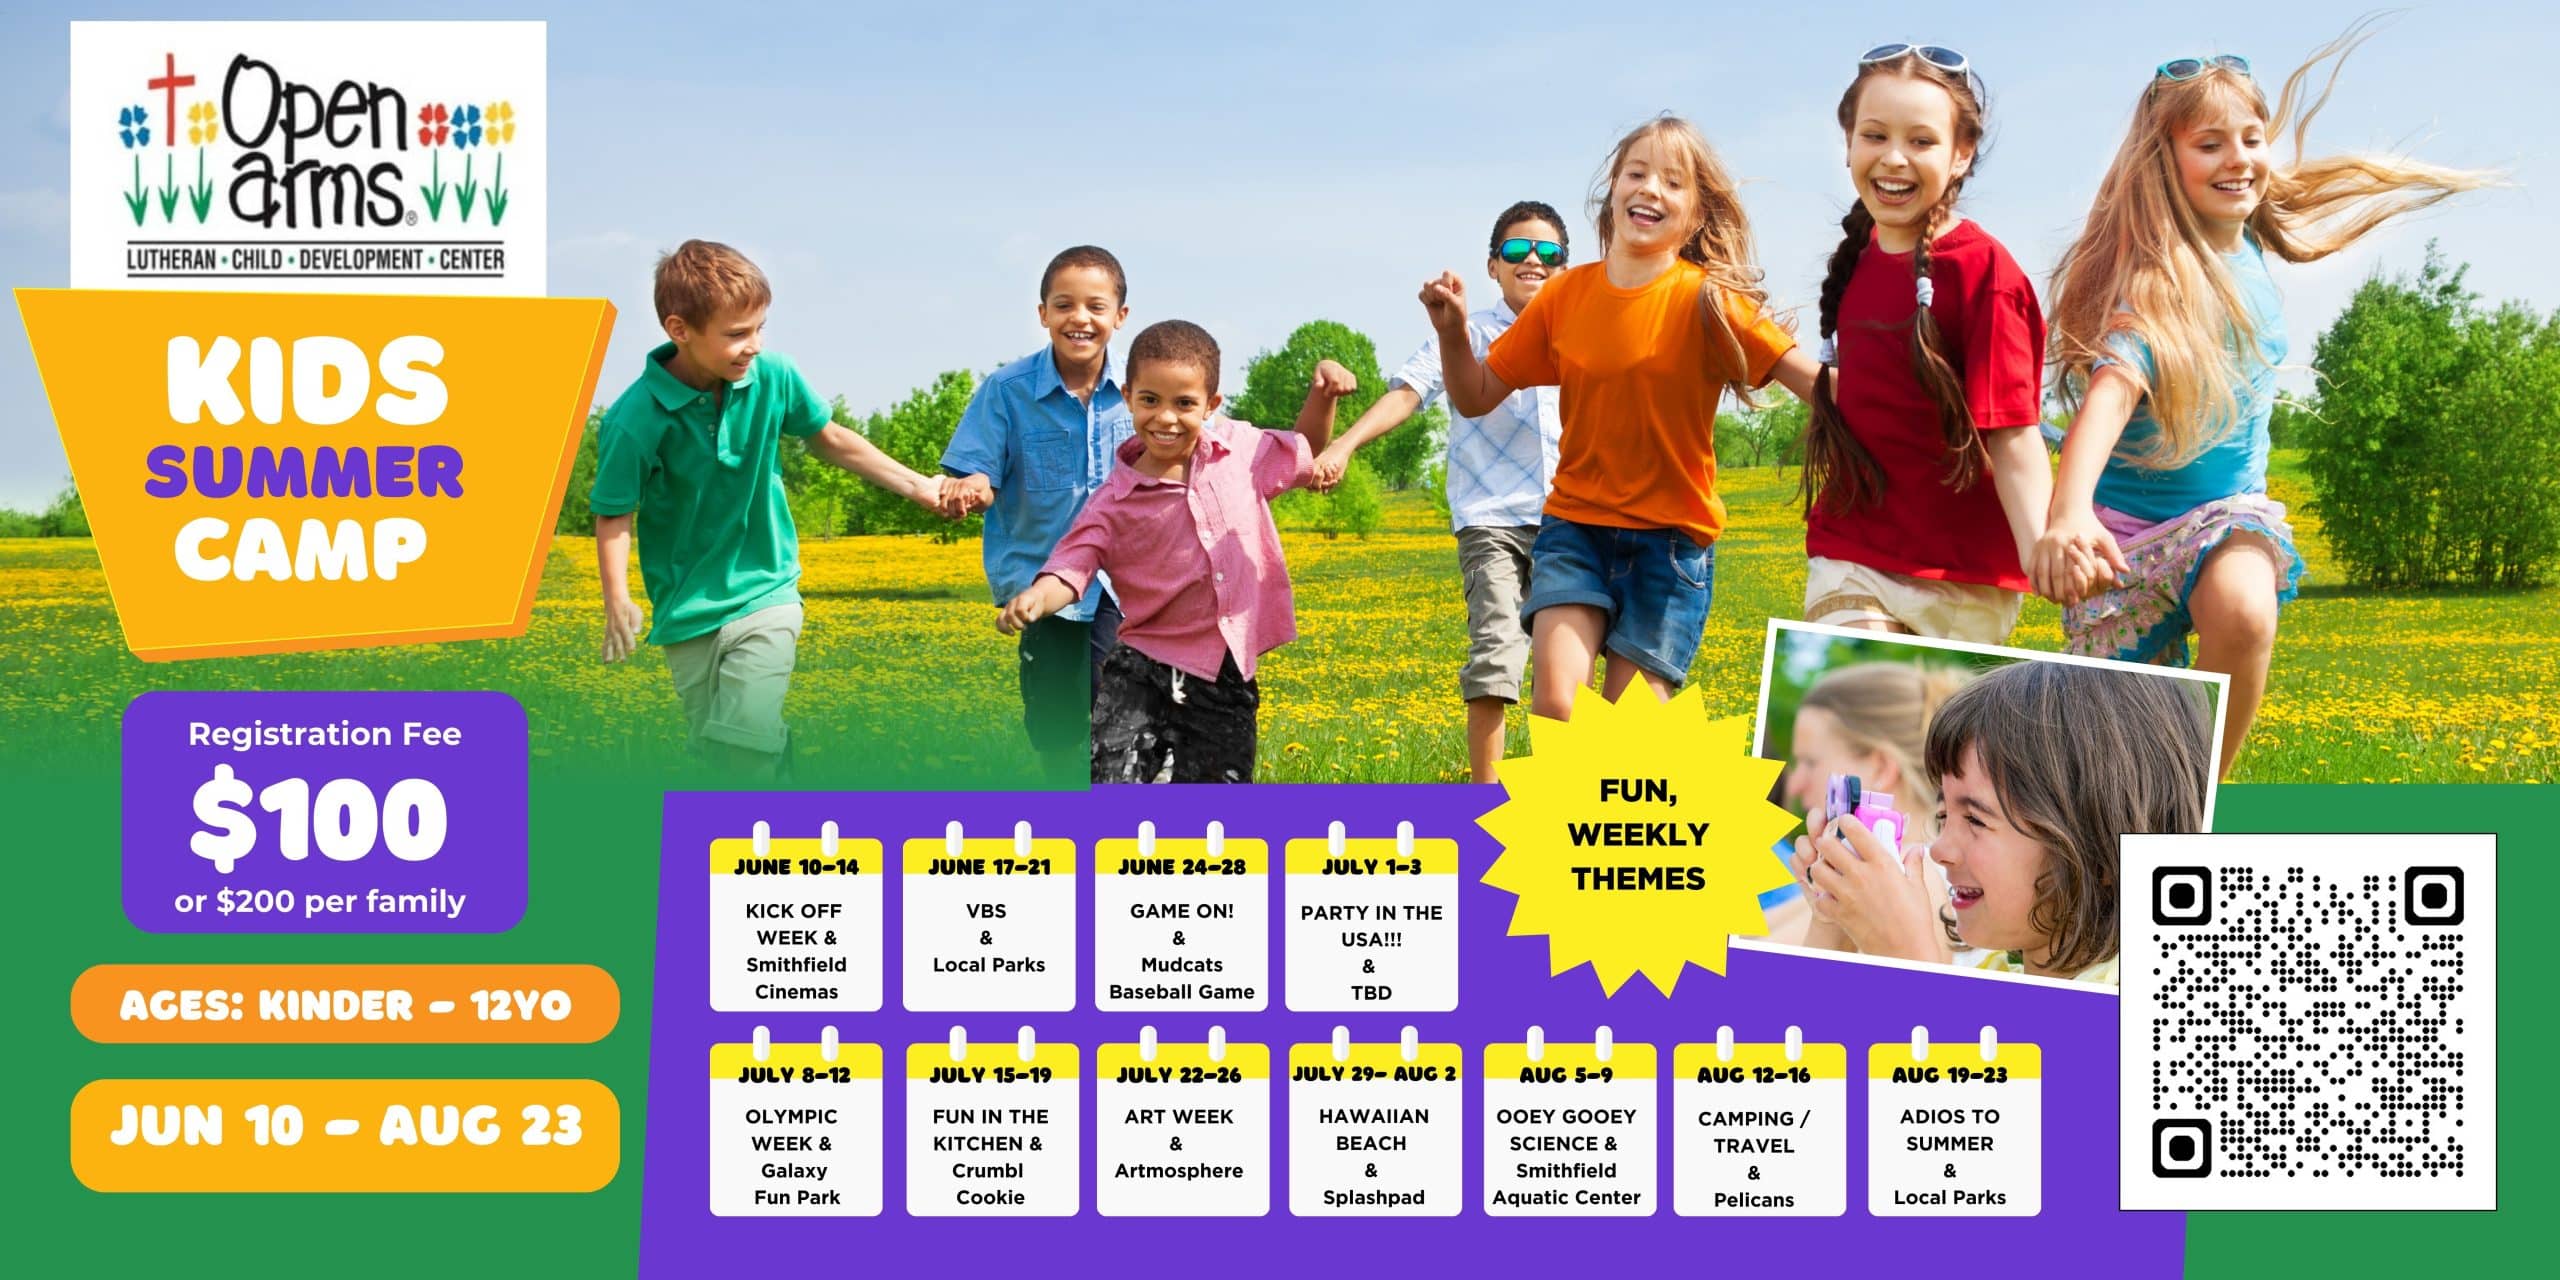 Green And Yellow Playful Kids Summer Camp Flyer 6912 X 3456 Px 1